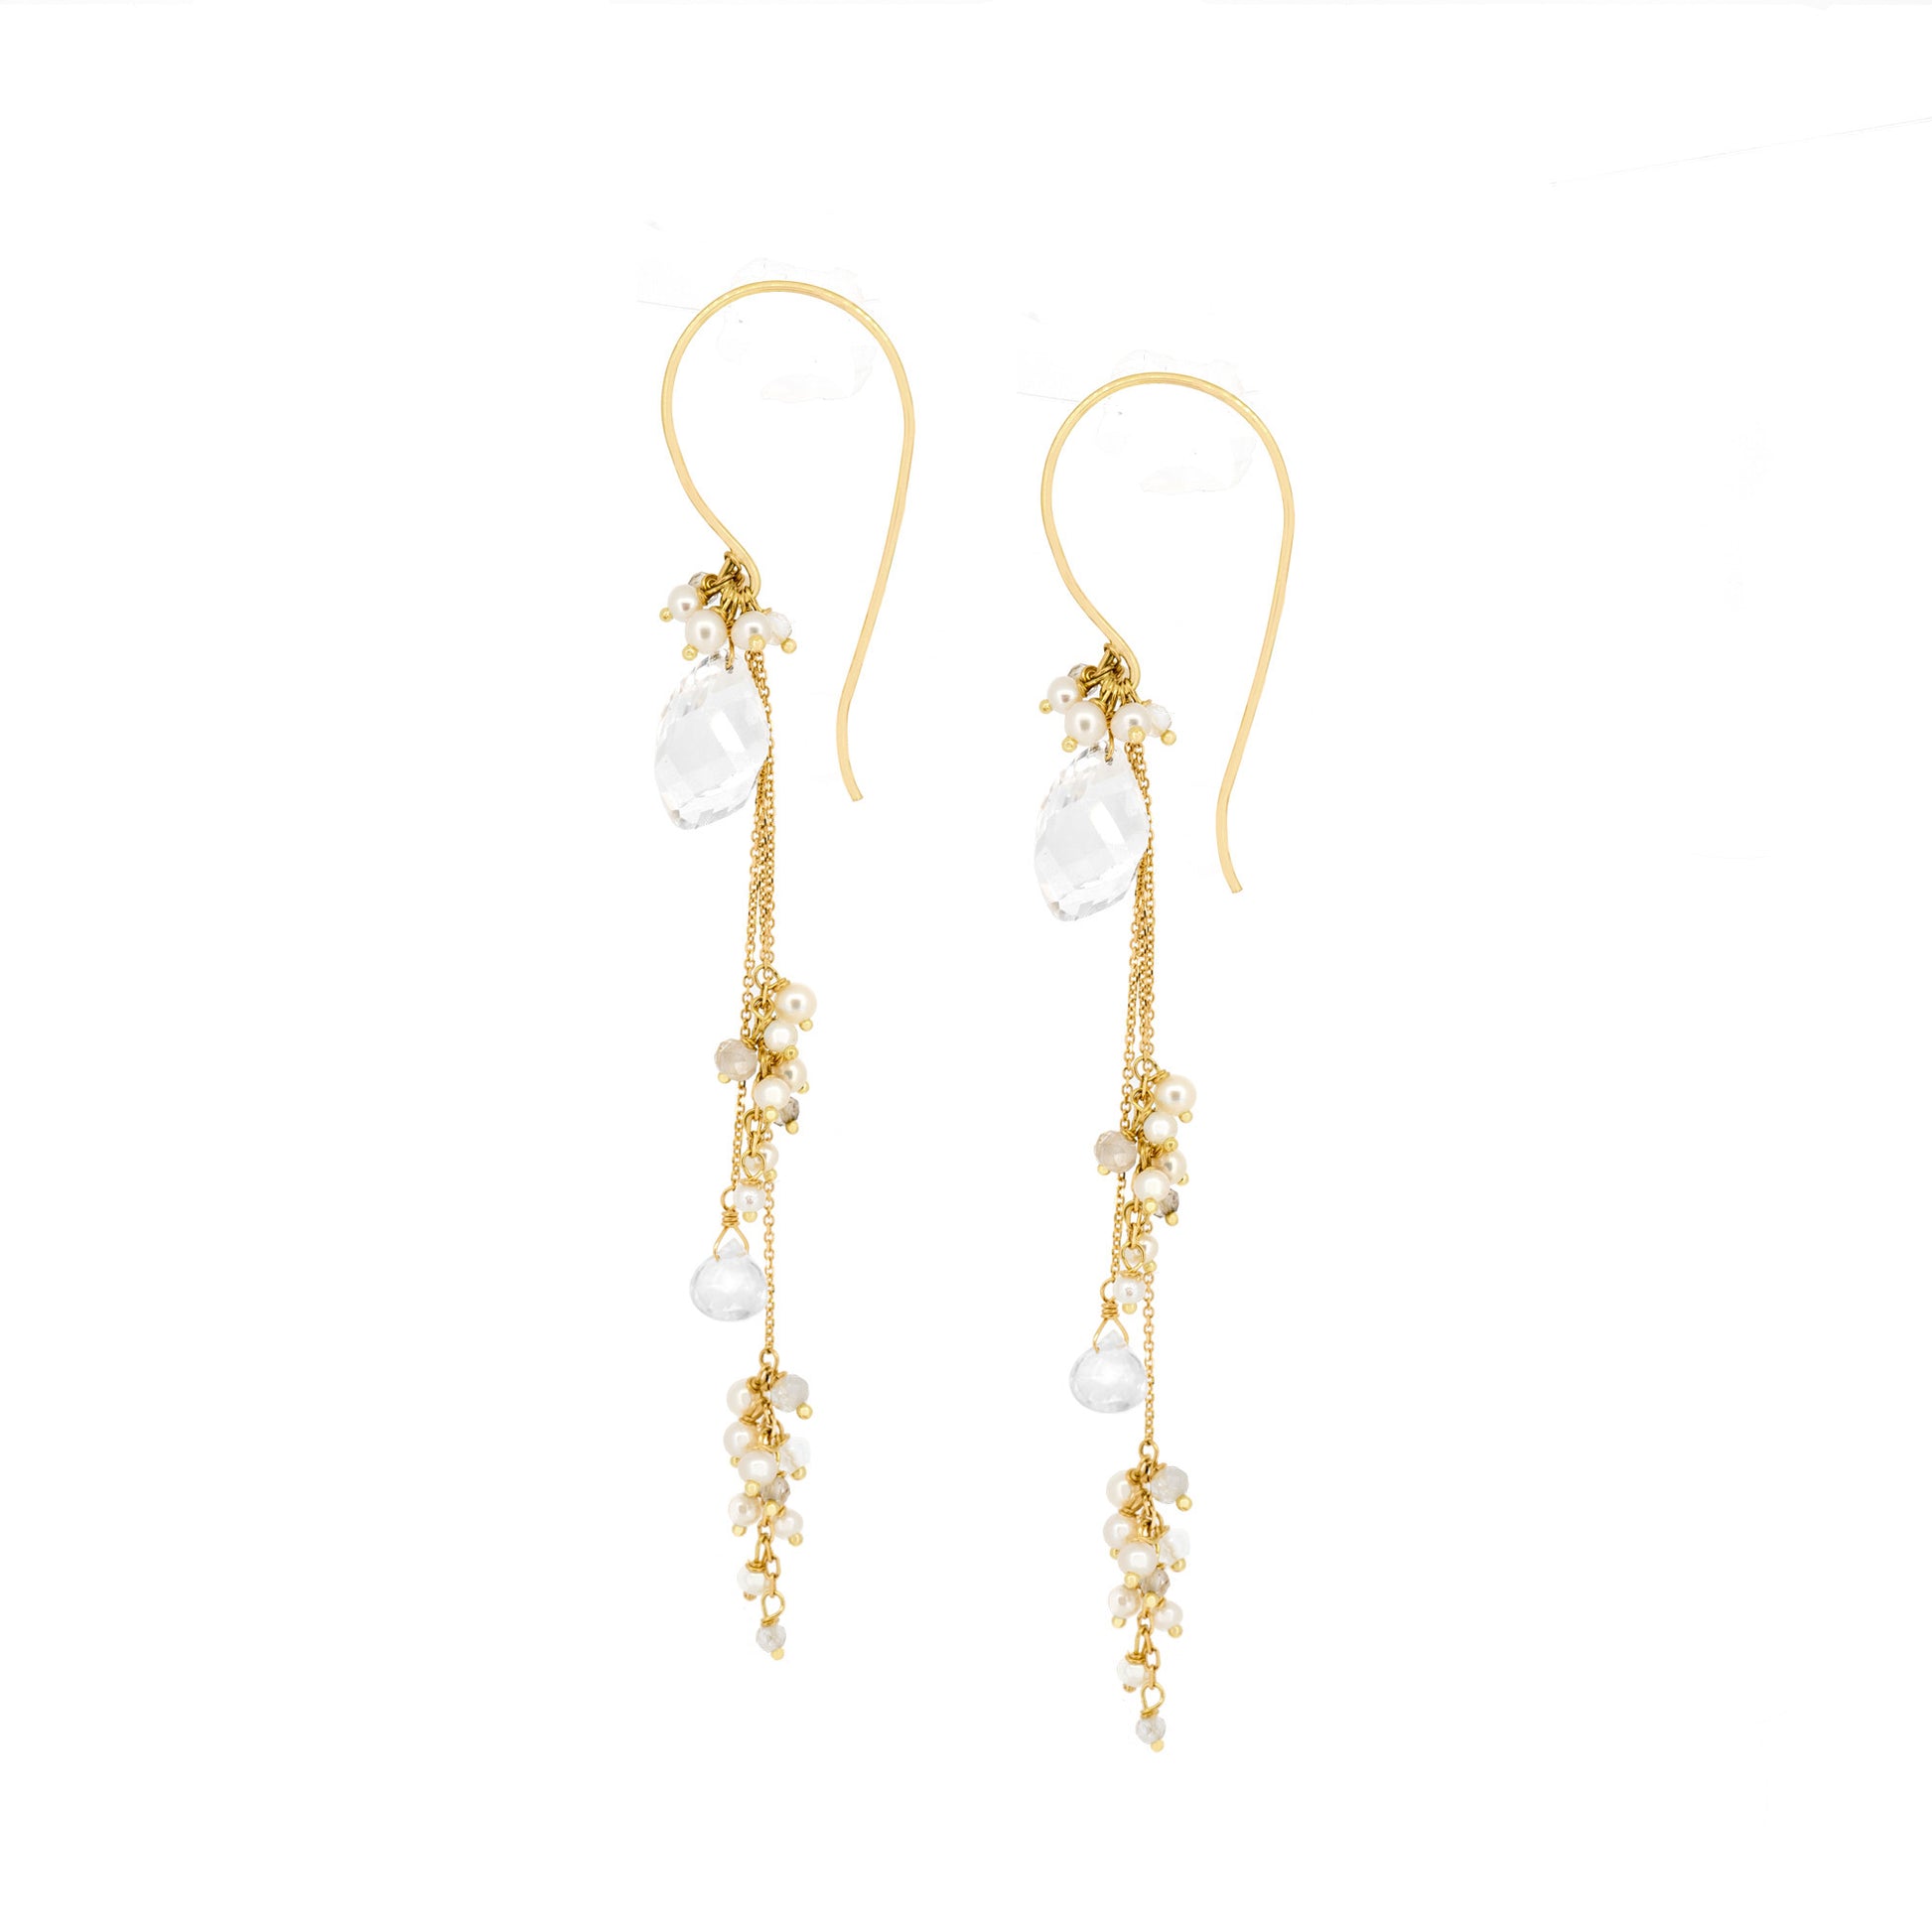 18ct Gold large hook earrings with chains, Pearls and Crystal beads/drops.